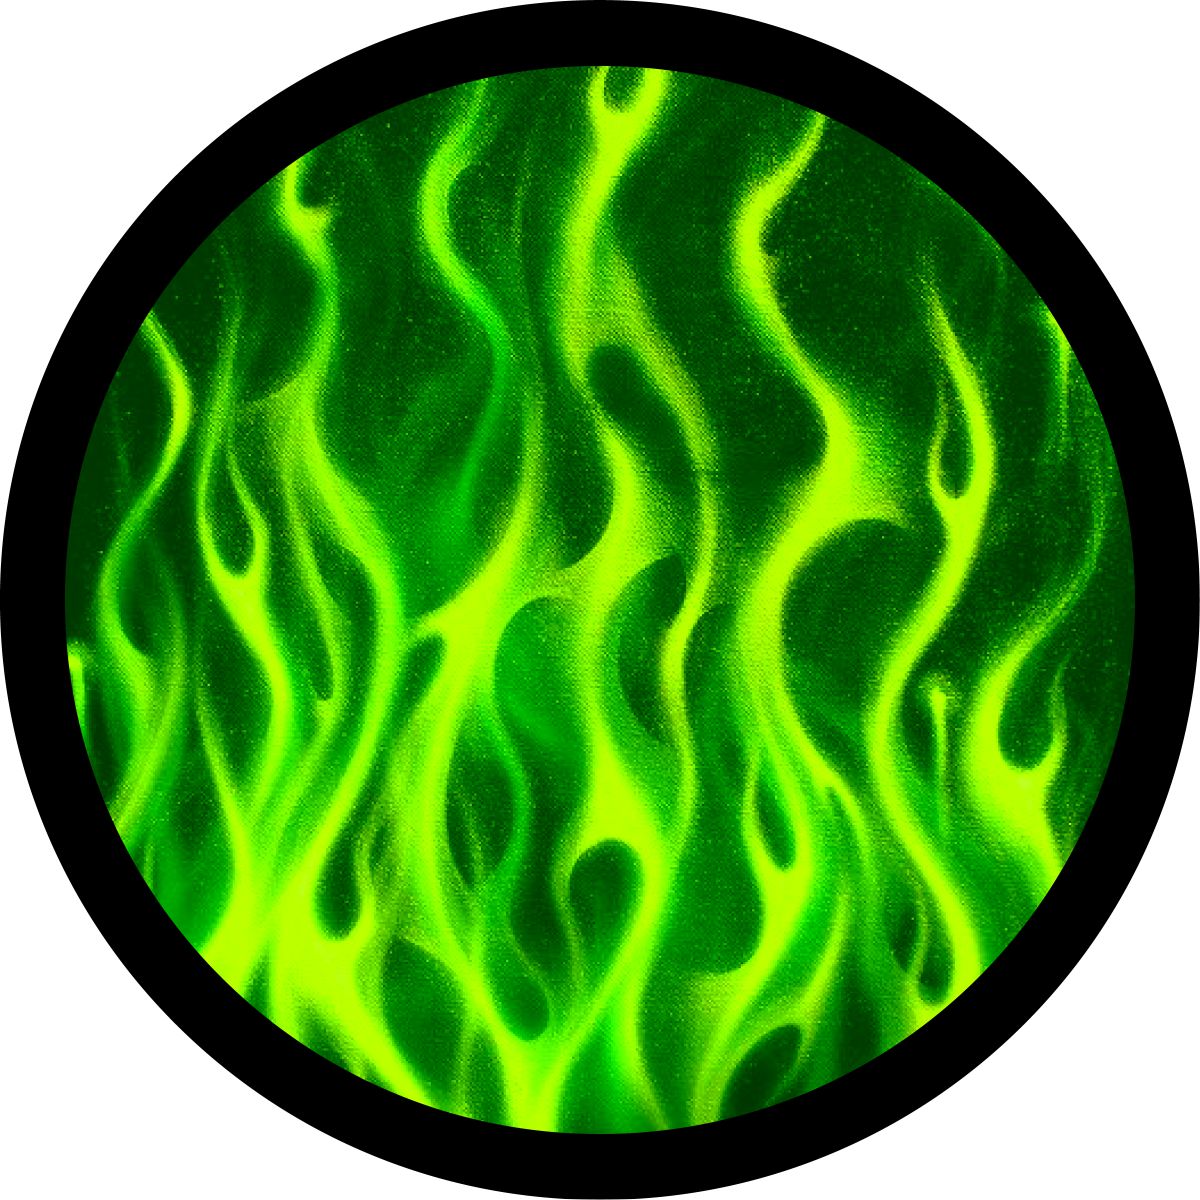 Spare tire cover - neon green flames, Gecko green Jeep Wrangler spare tire cover. Spare tire cover for RV, Bronco, Jeep, Camper, and more